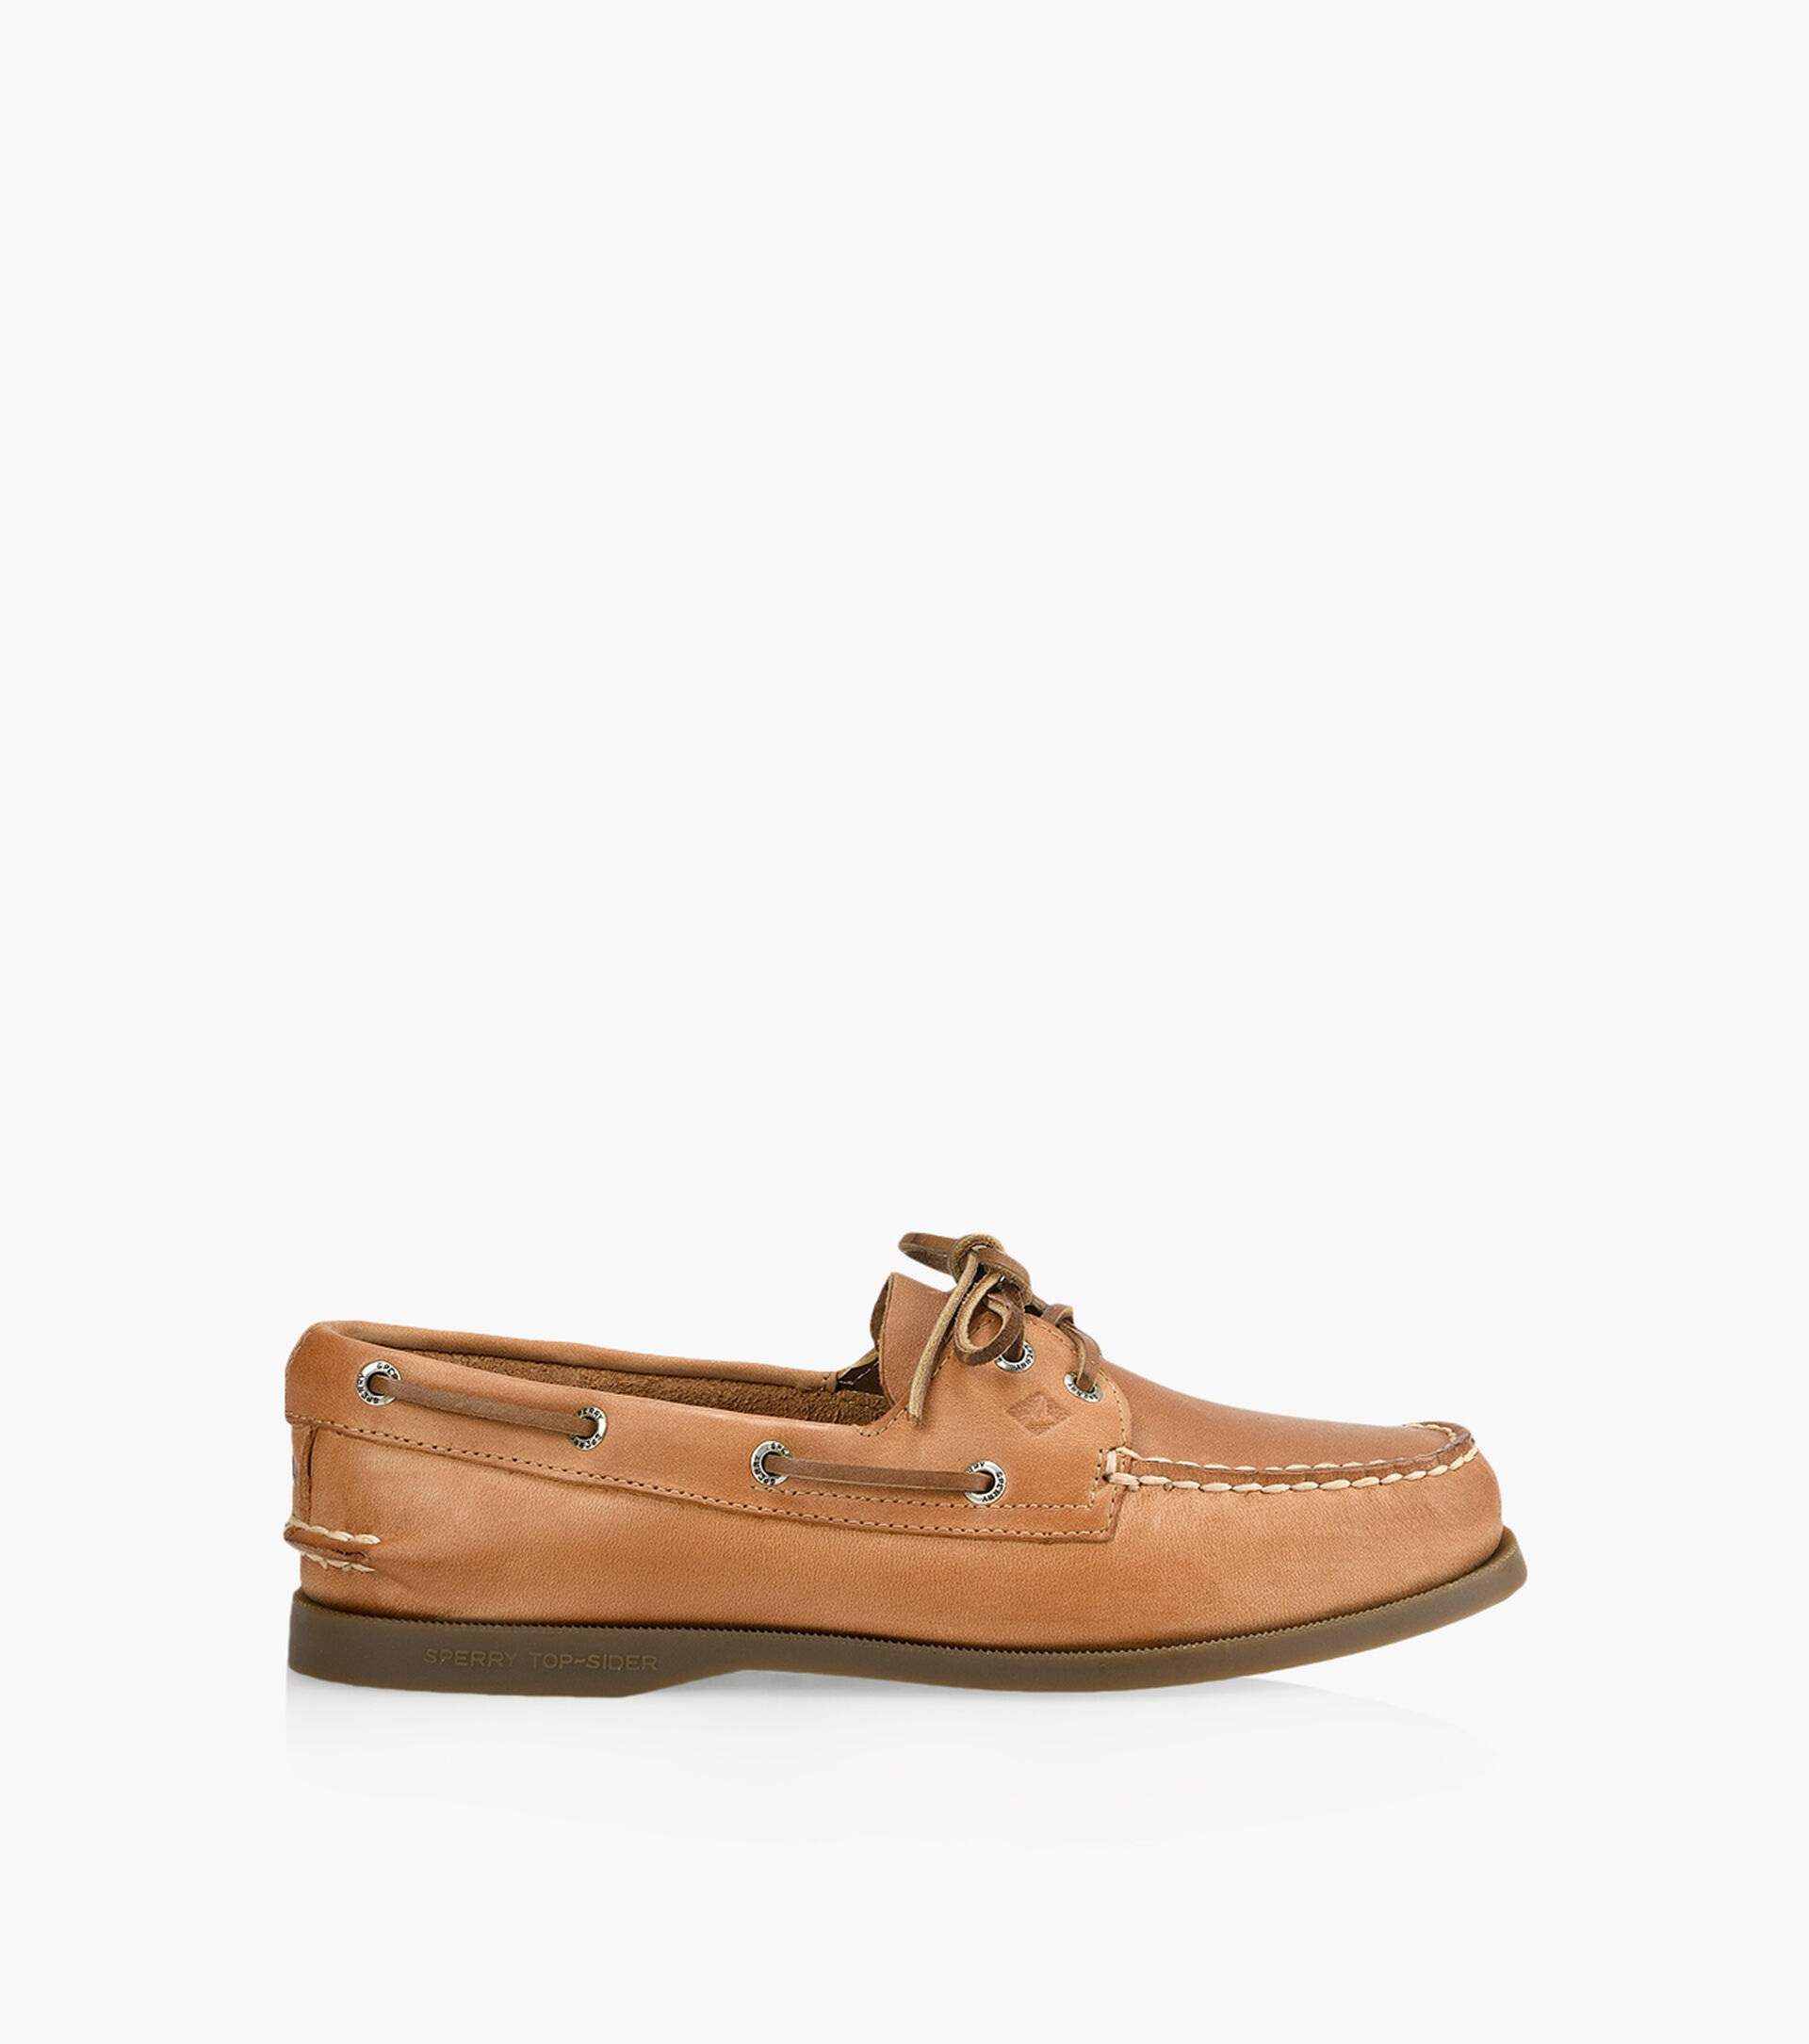 SPERRY AUTHENTIC ORIGINAL 2-EYE BOAT SHOE - Tan Leather | Browns Shoes